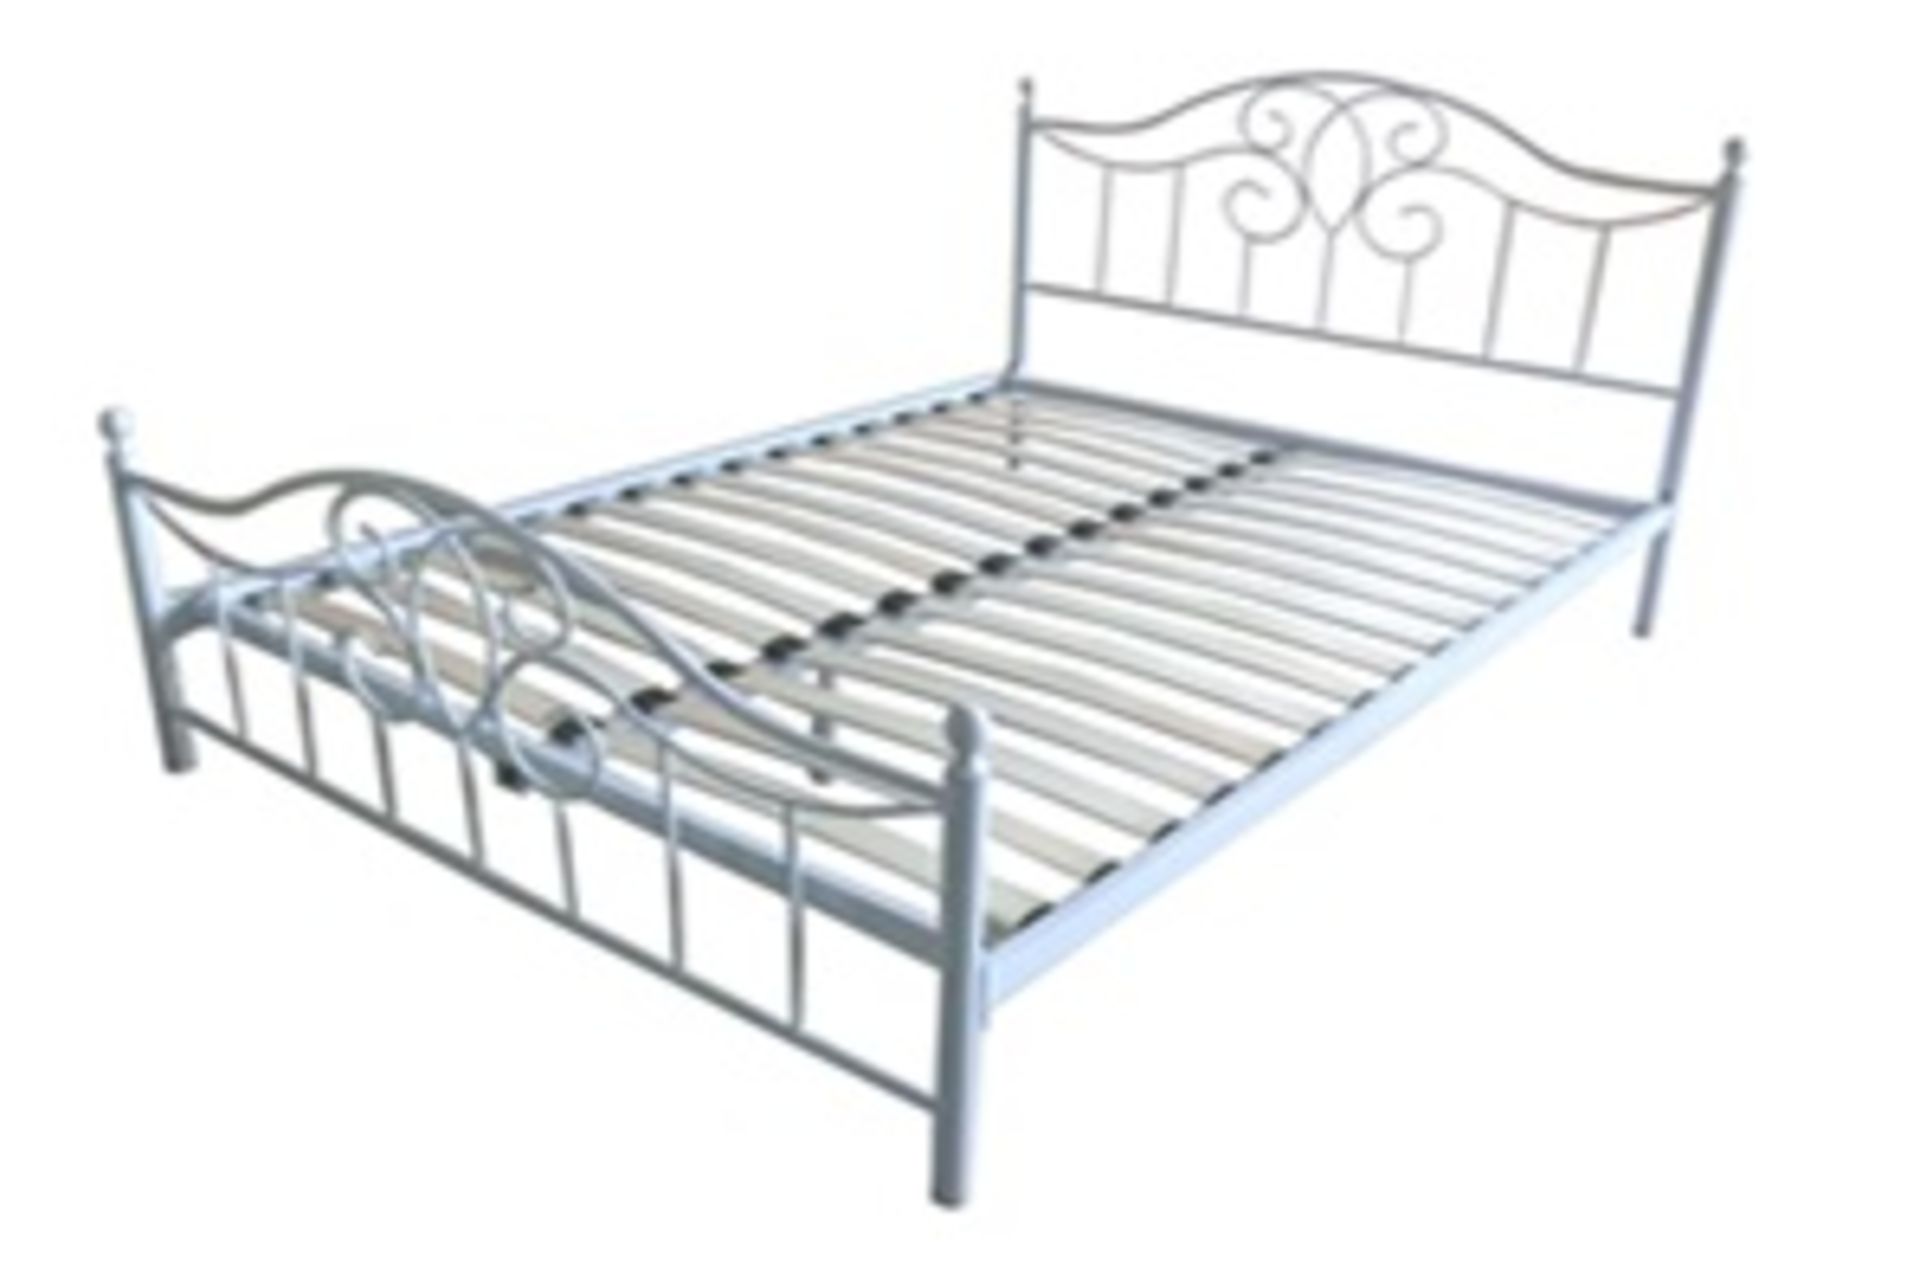 1 x Black Metal Bed (Brand New & Boxed)